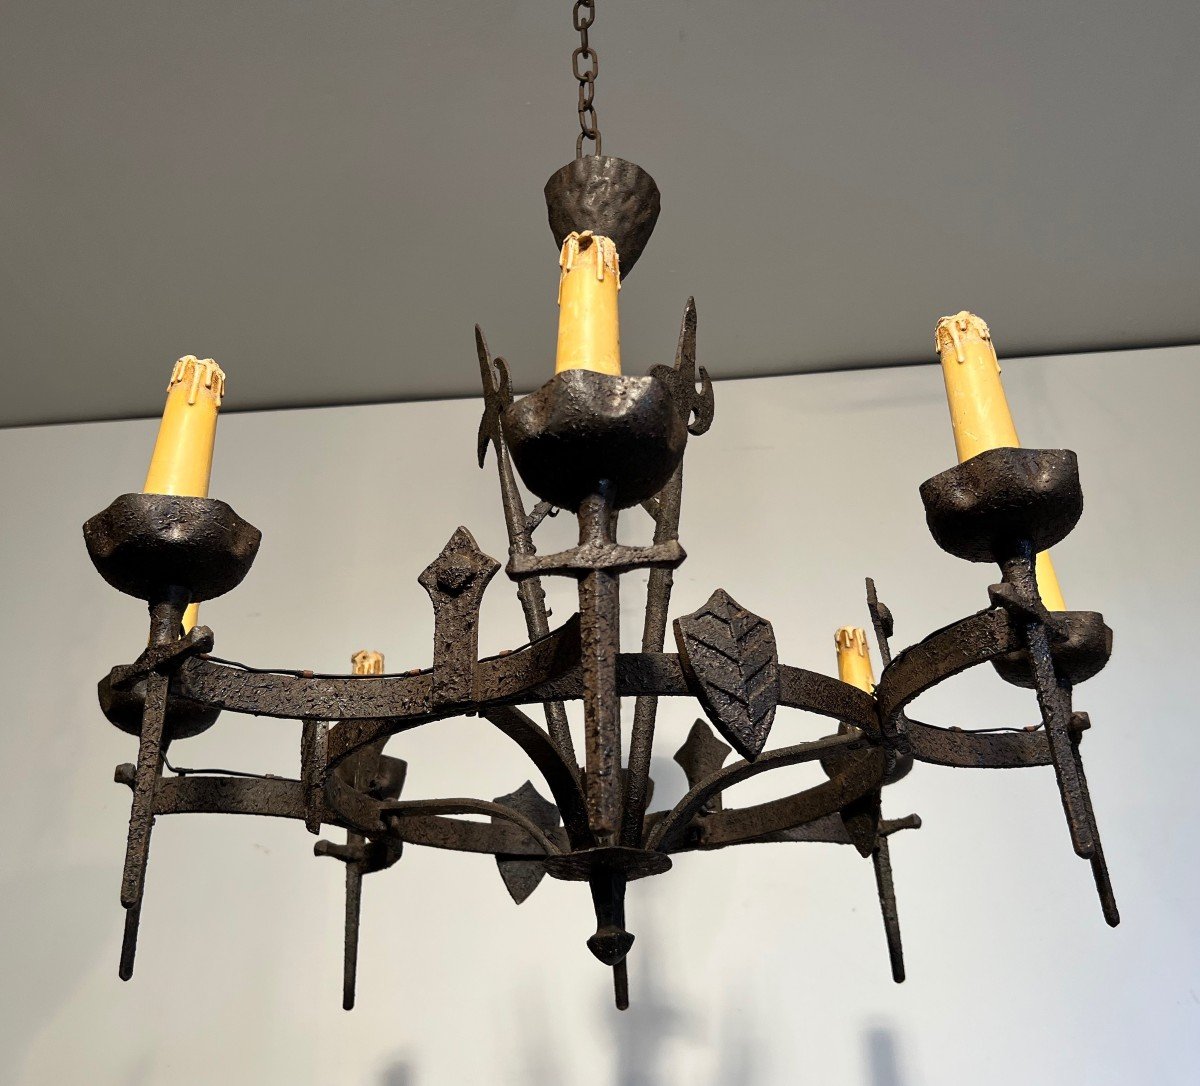 Rare Pair Of Gothic Style Wrought Iron Chandeliers With 8 Arms Of Light.-photo-6